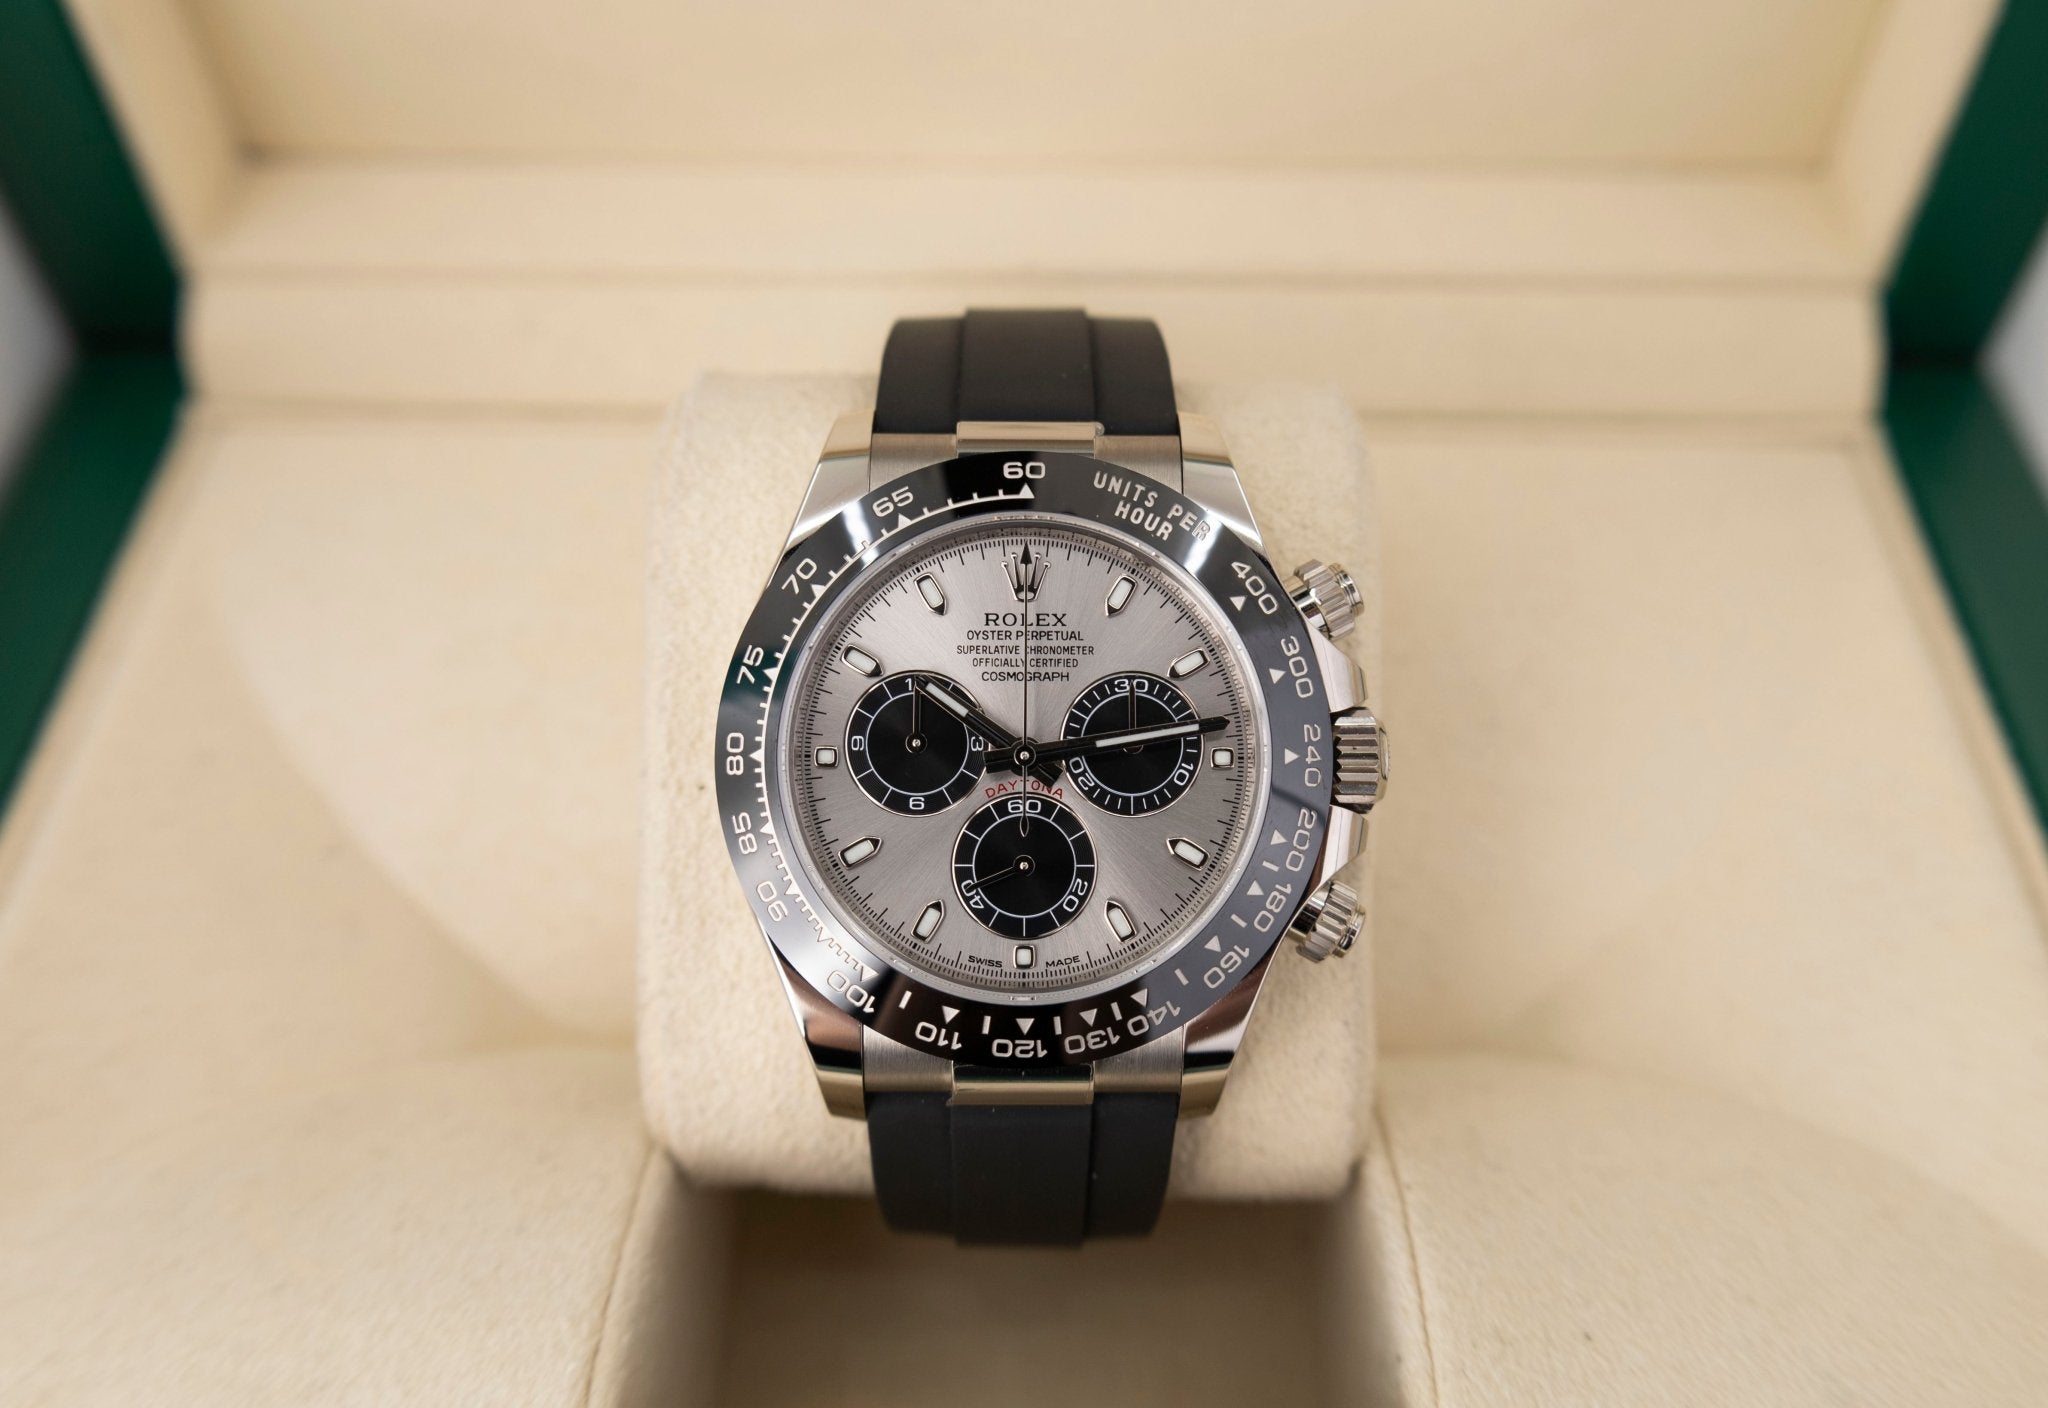 Verval Subjectief Piraat Rolex White Gold Cosmograph Daytona 40 Watch - Steel Index Dial - Blac –  Luxury Time NYC